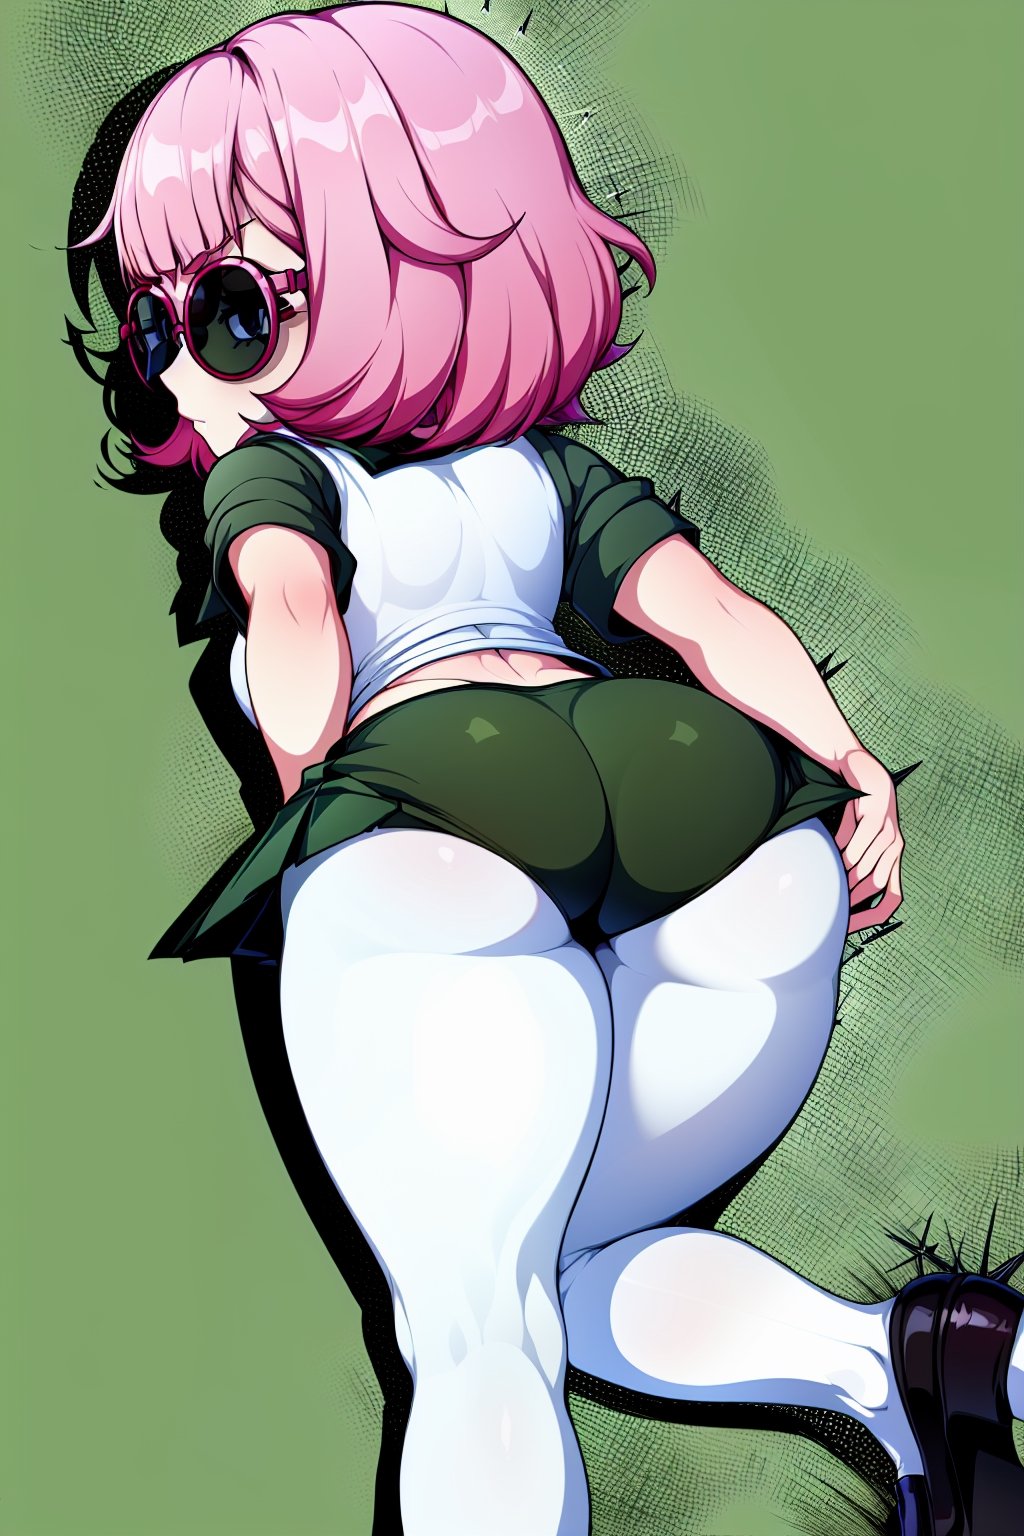 1 girl, solo, Saiki Kusuo, pale pink hair, disheveled hair, sharp hair, short hair, spiky hair, prickly bangs, emotionless face, calm face, no emotions, cold face, Japanese school uniform, short green skirt, white shirt with short arms, green shirt collar, oval glasses, thin-rimmed glasses, black frames, matte lenses, the eyes are not visible behind the lenses of the glasses, white stockings, black flat shoes, perfect body, plump ass, tight ass, sexy ass, perfect ass, slim waist, thin shoulders, small breasts, moist skin, perfect body, abs, detailed intimate places, slim hips, elastic hips,

,